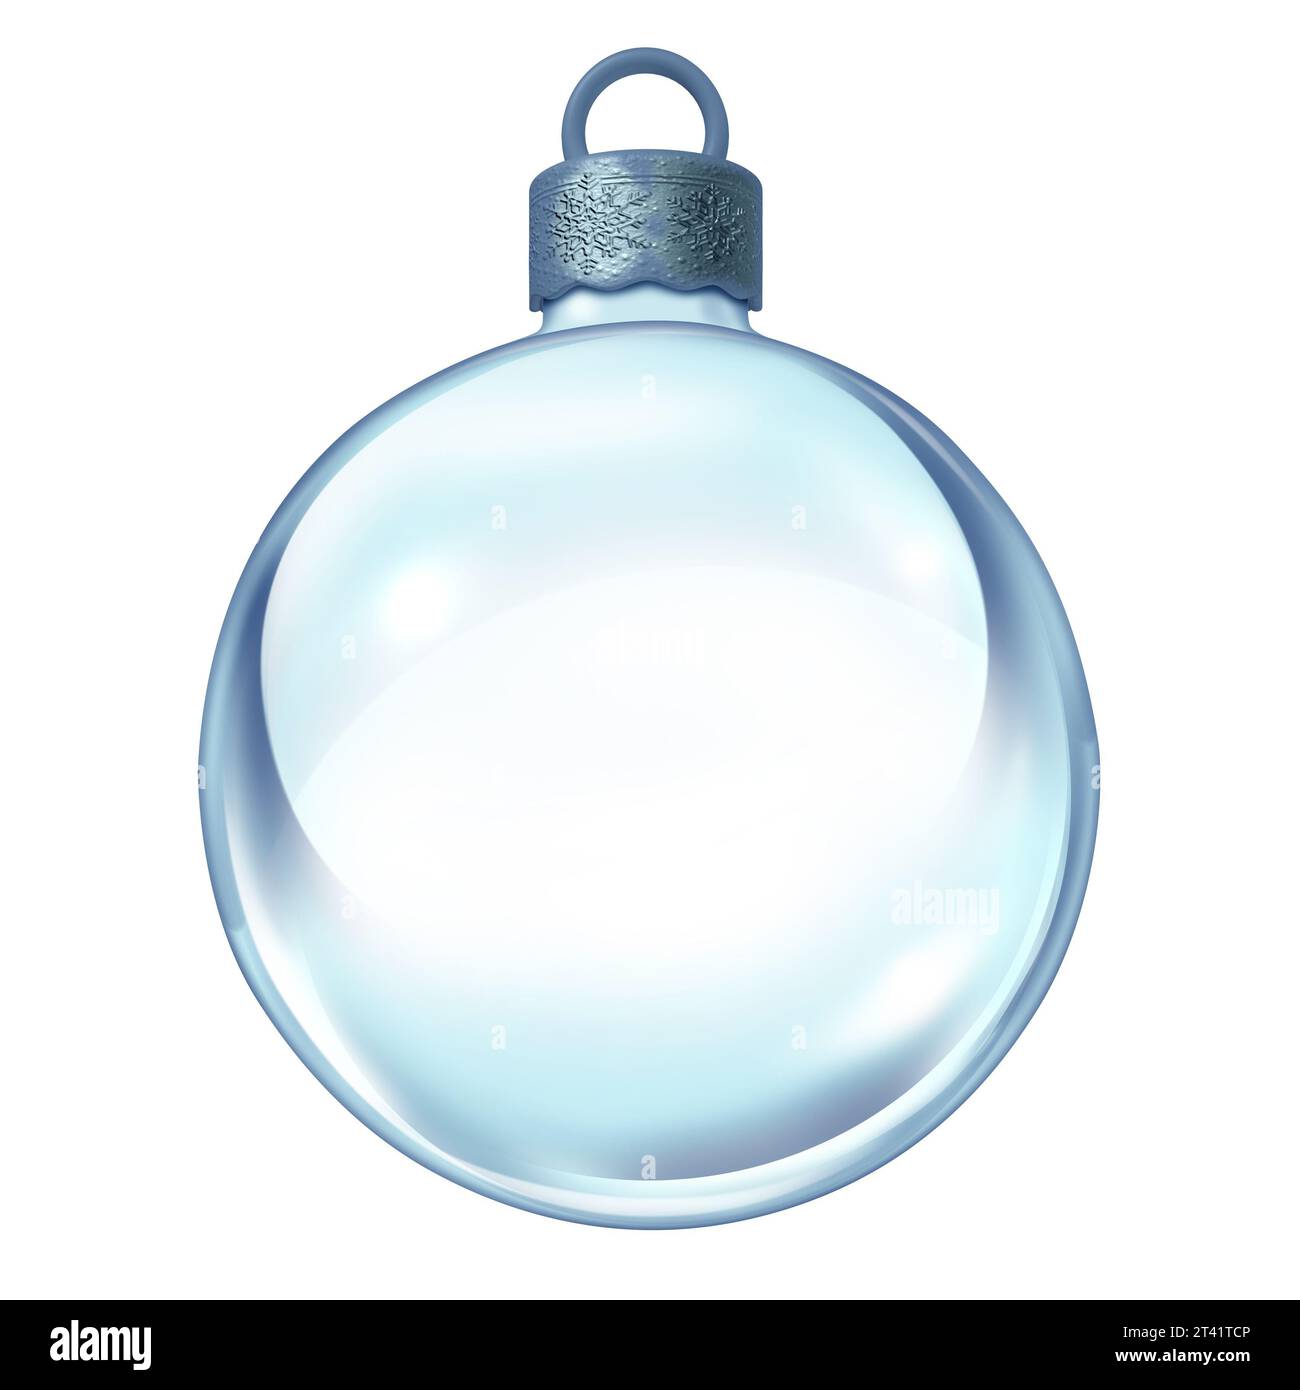 Glass Christmas Ball ornament as a crystal winter holiday sphere decoration as a Happy New Year seasonal ornamental design element isolated Stock Photo